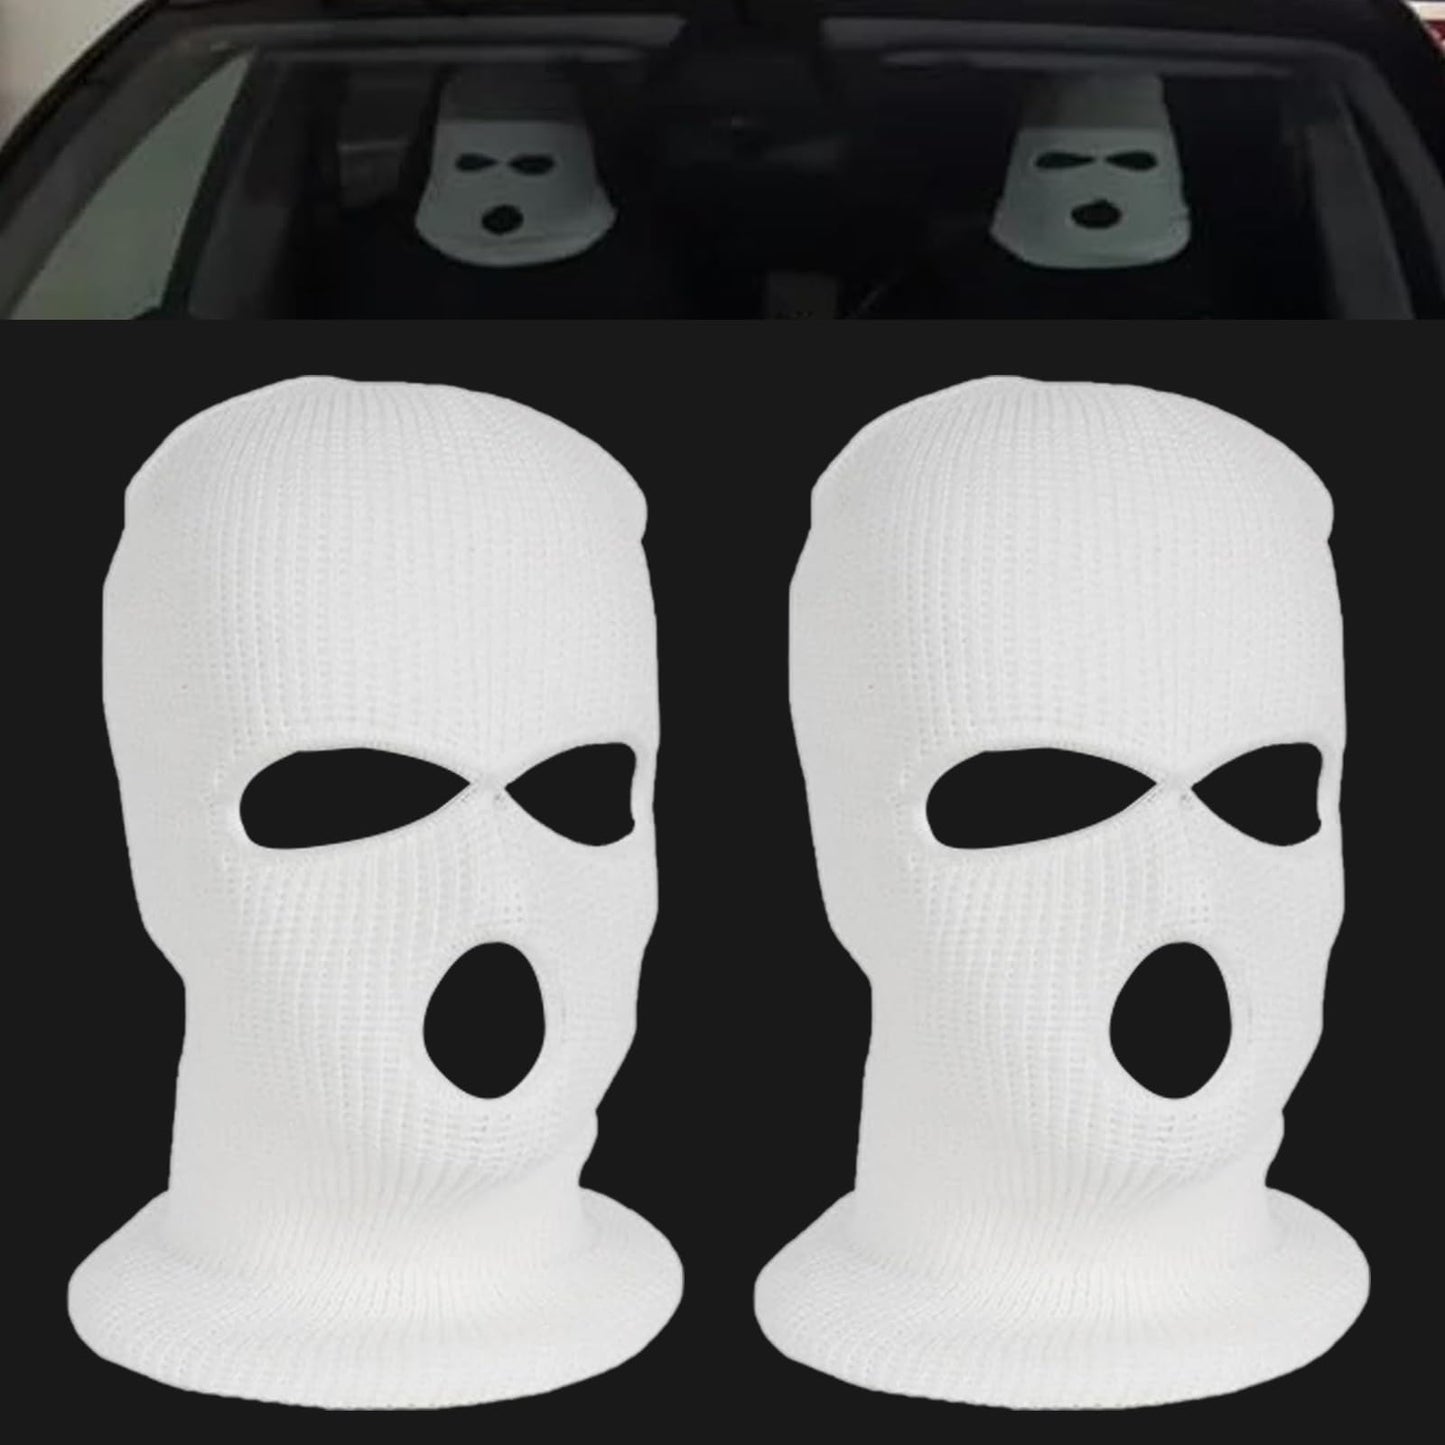 2-Piece Car Seat Headrest Cover Set: Universal and Creative Personalized Funny Hat for Car Seat Headrests